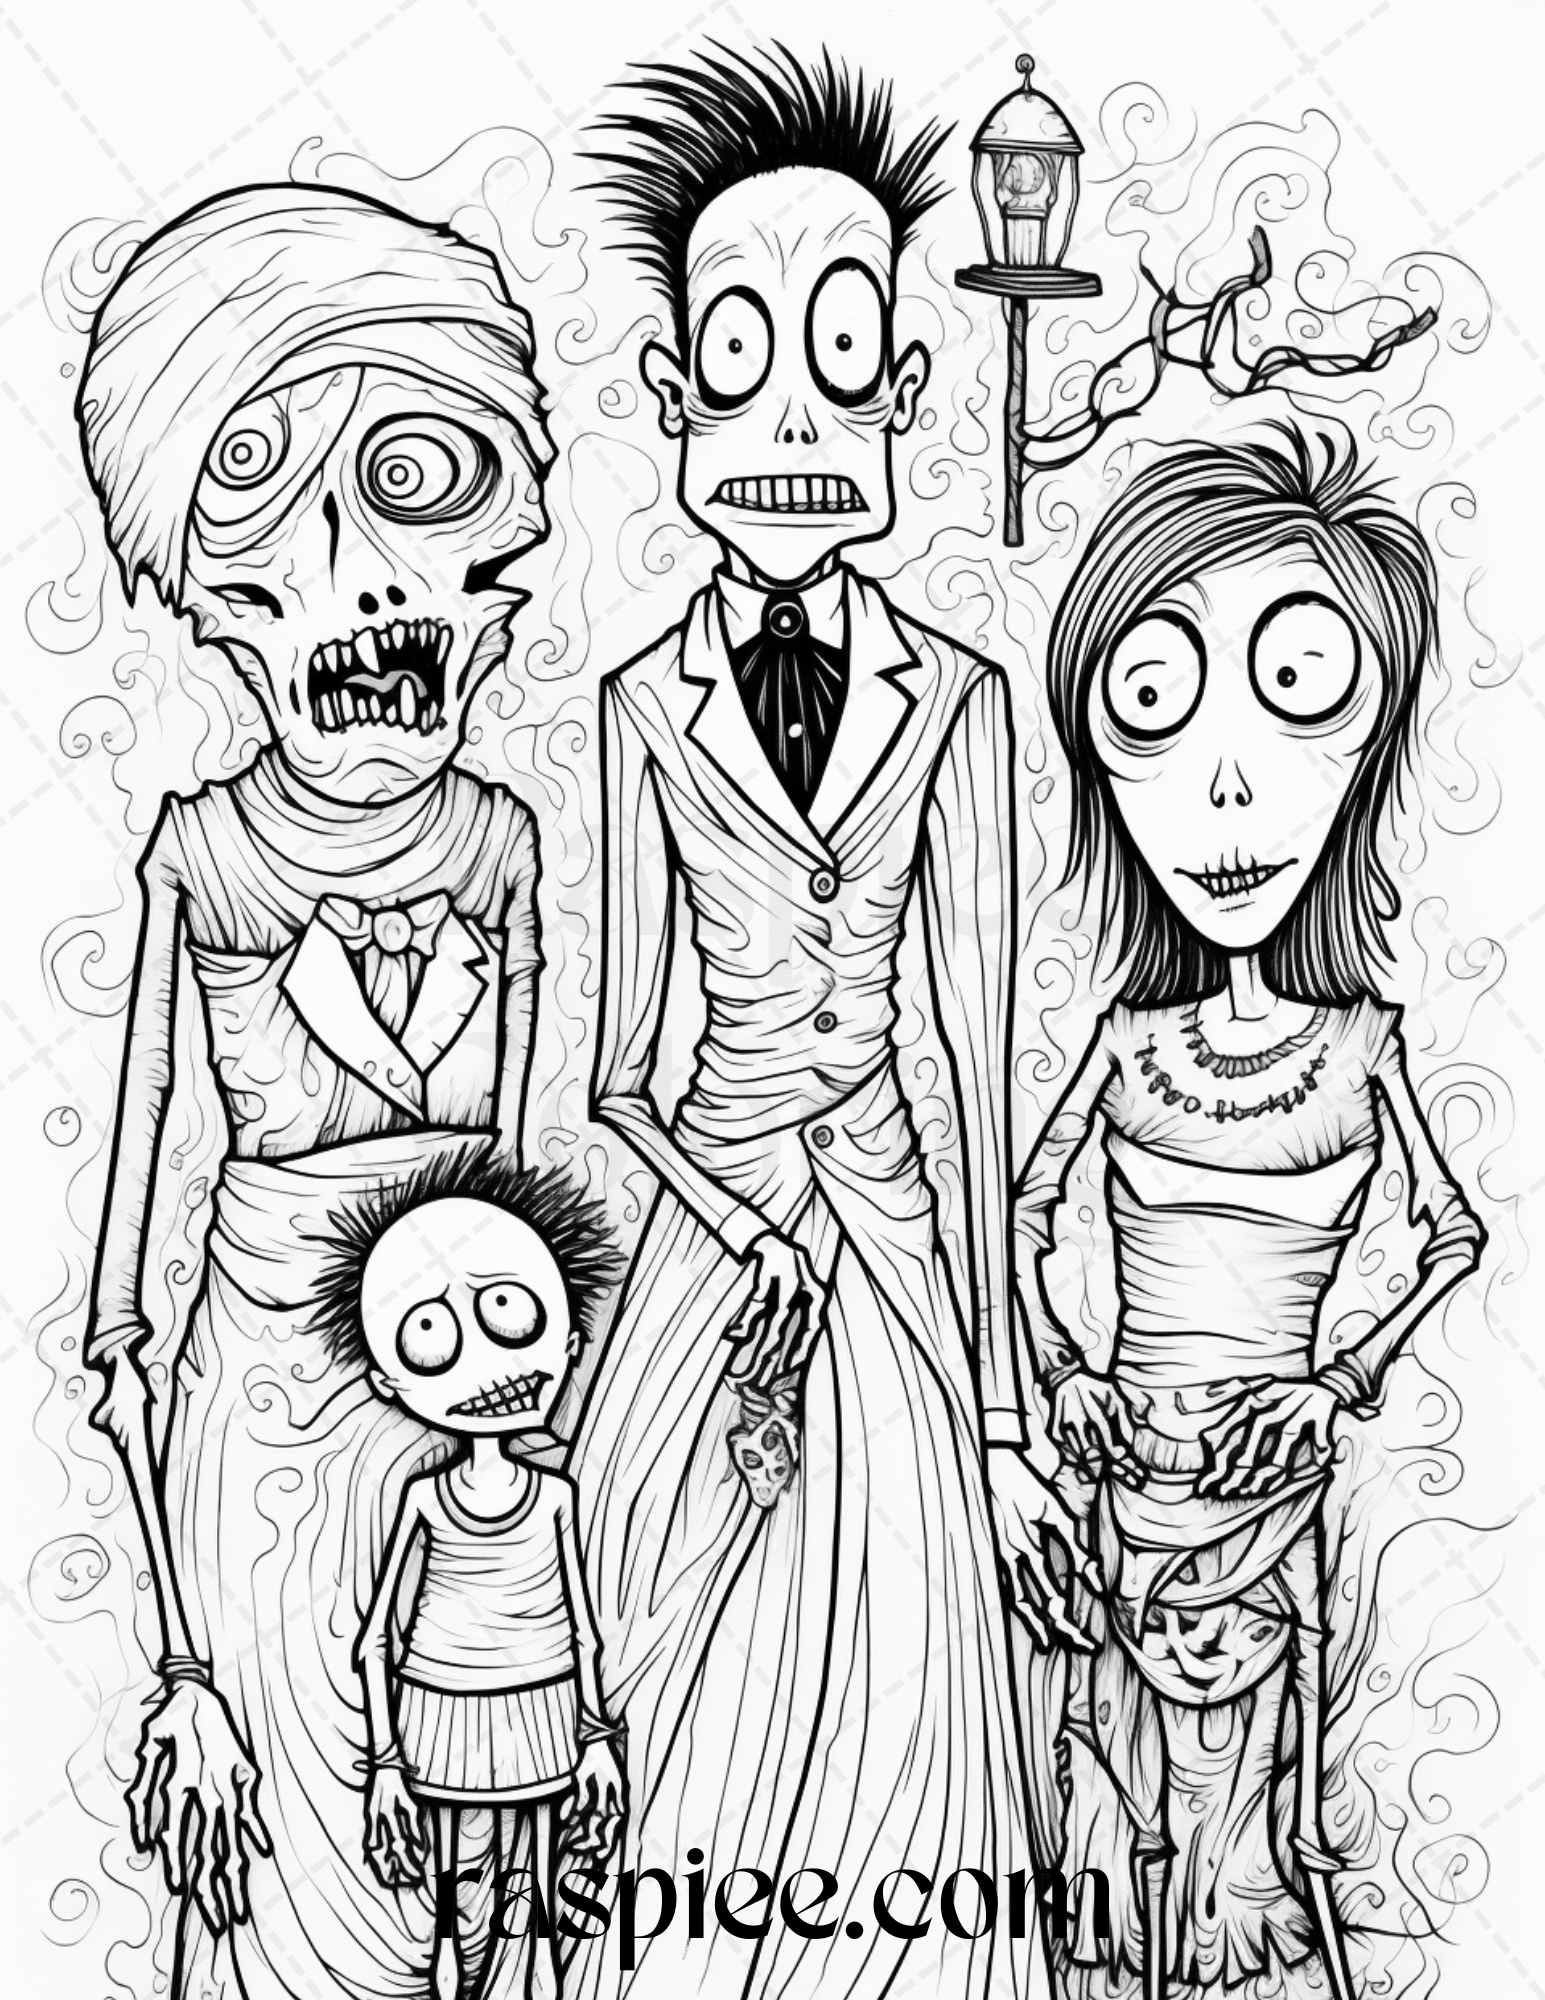 50 Monster Family Grayscale Coloring Pages Printable for Adults - Instant Download, Halloween Coloring Book, Fun and Spooky Designs - Raspiee Coloring